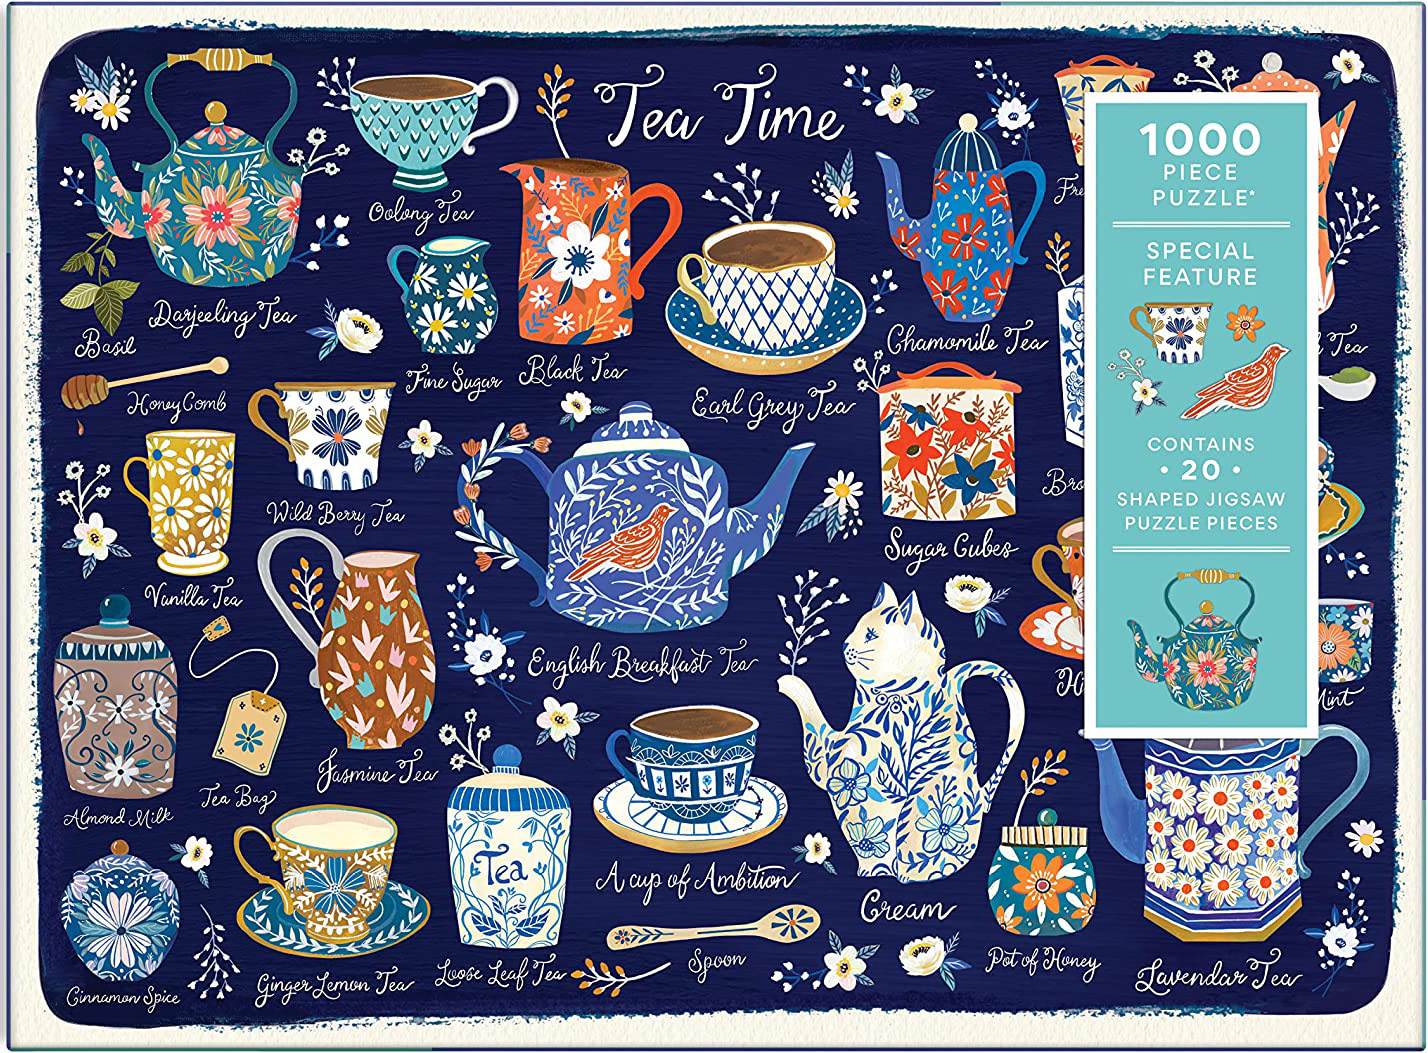 Tea Time Food and Drink Jigsaw Puzzle